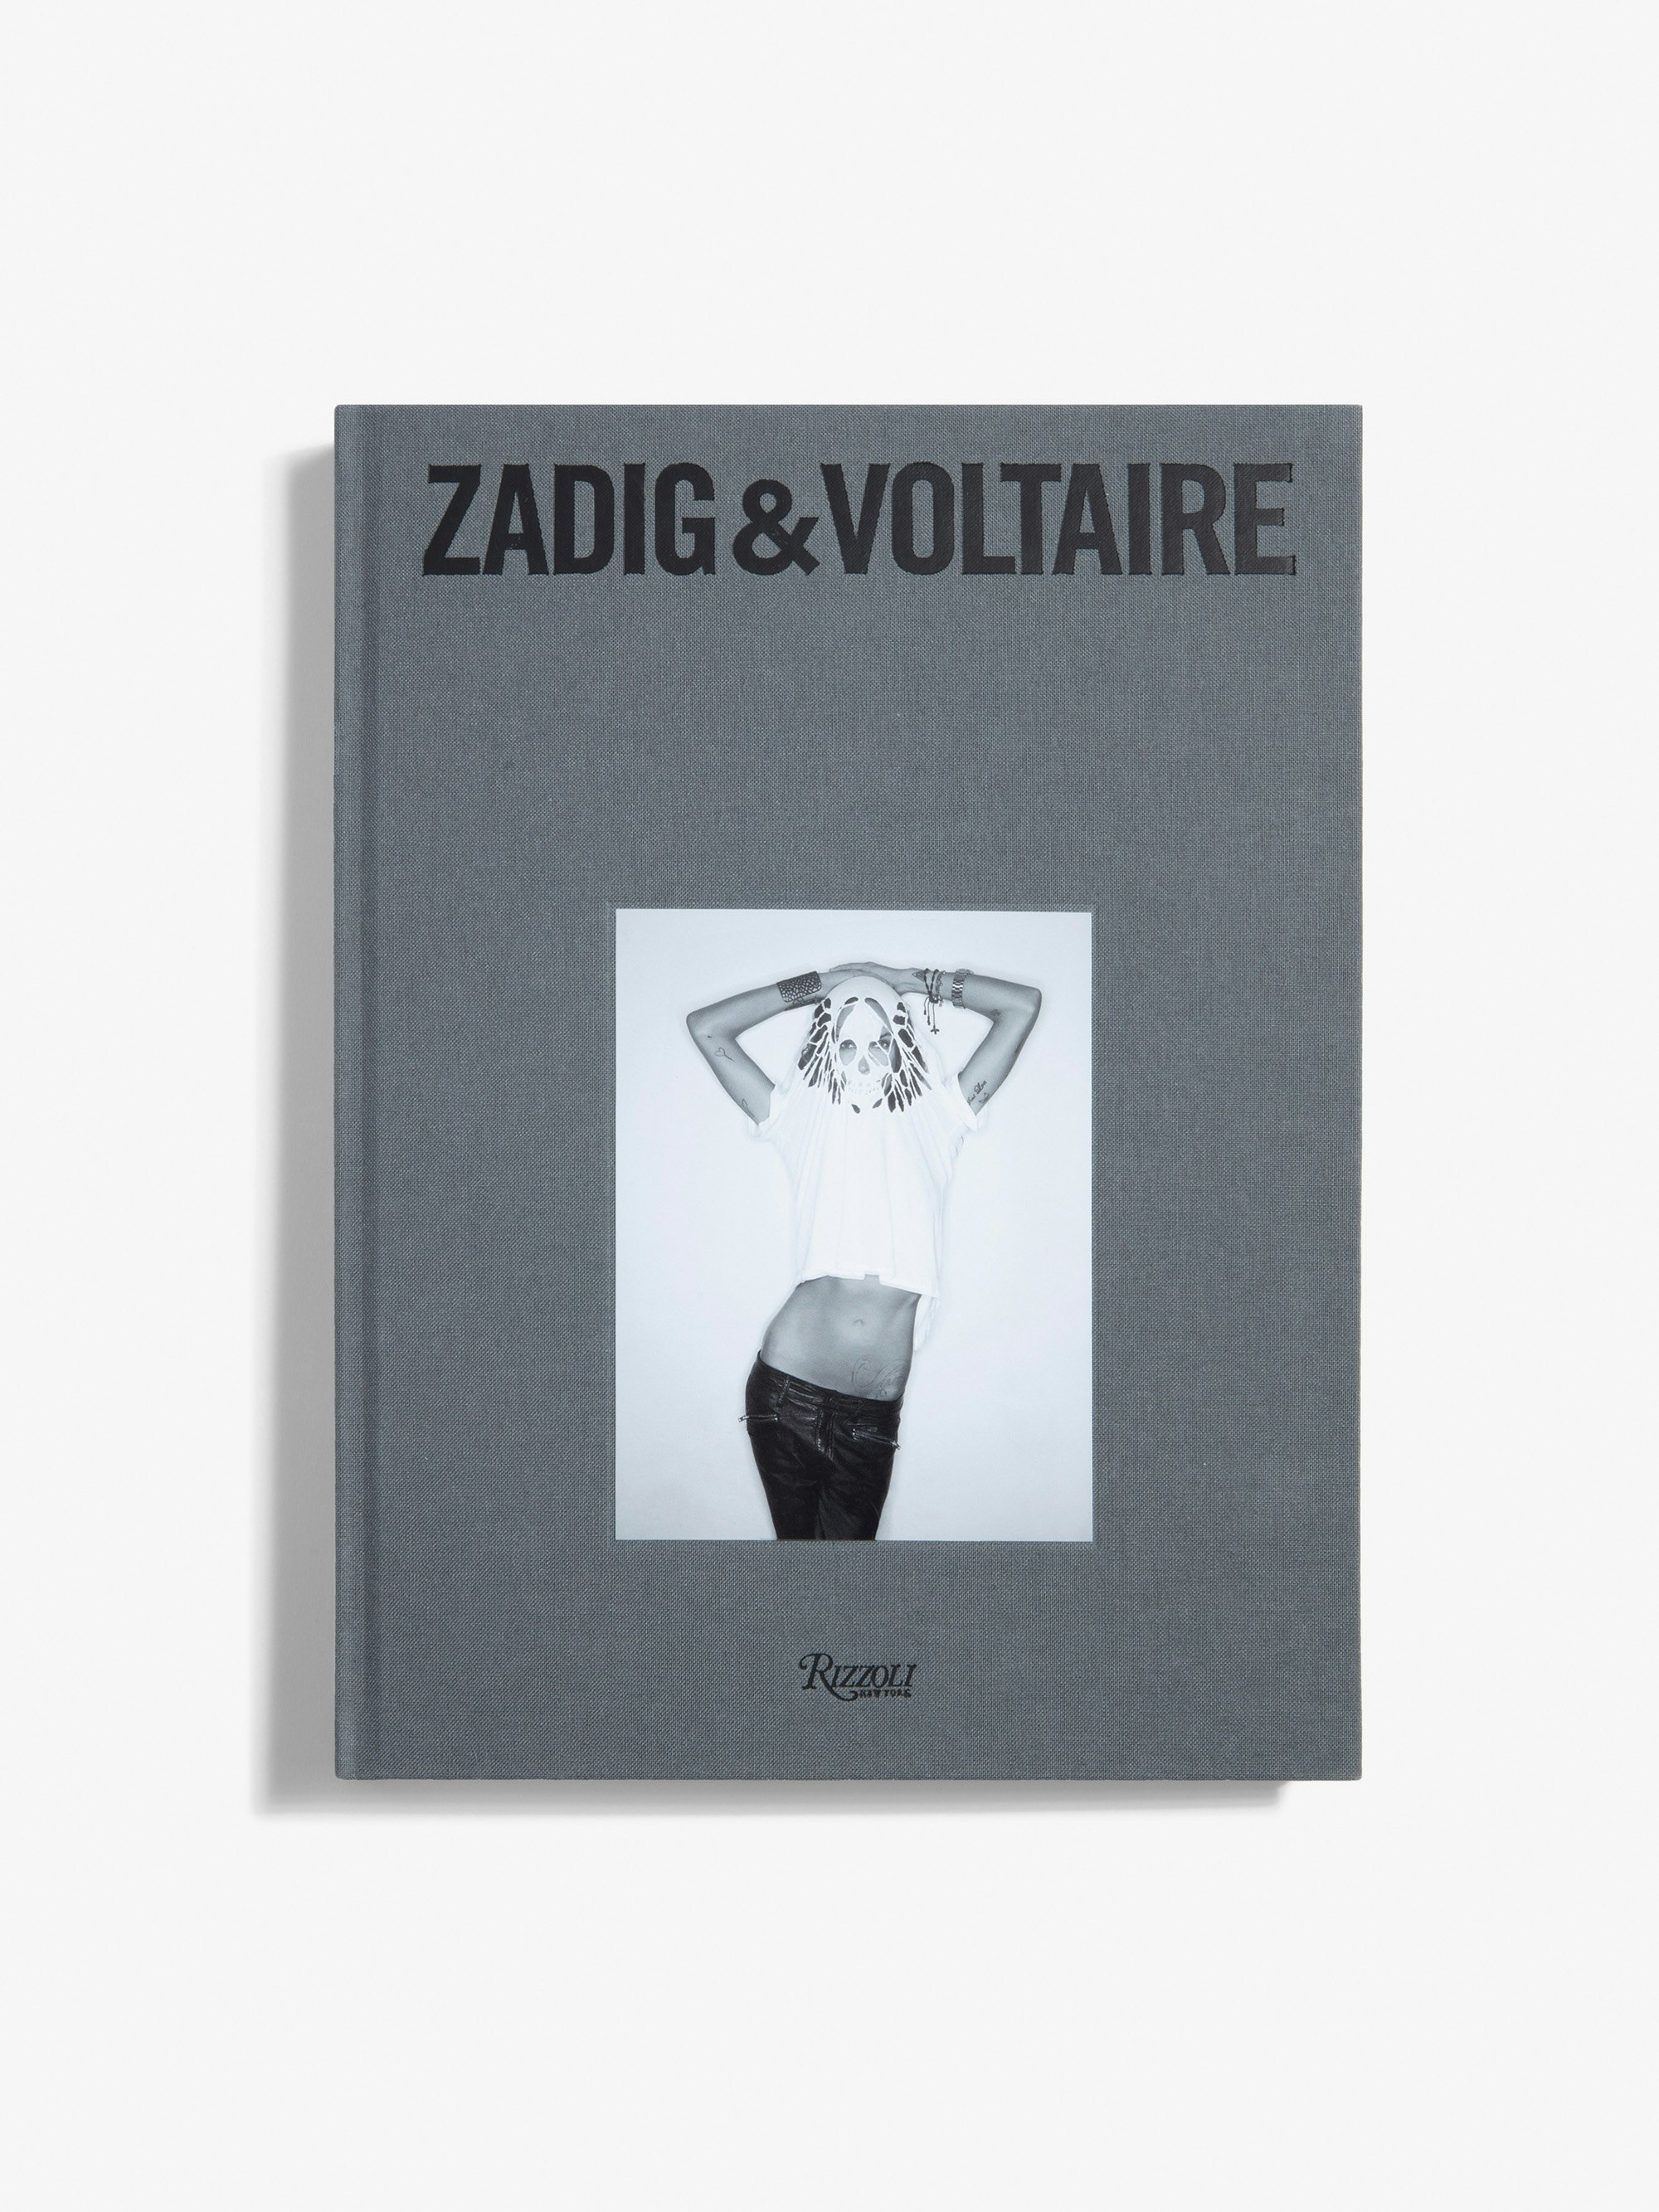 Book "Zadig&Voltaire: Established 1997 in Paris" - French Version - The first monograph on Zadig&Voltaire, published on the occasion of the brand’s 25th anniversary - French version.